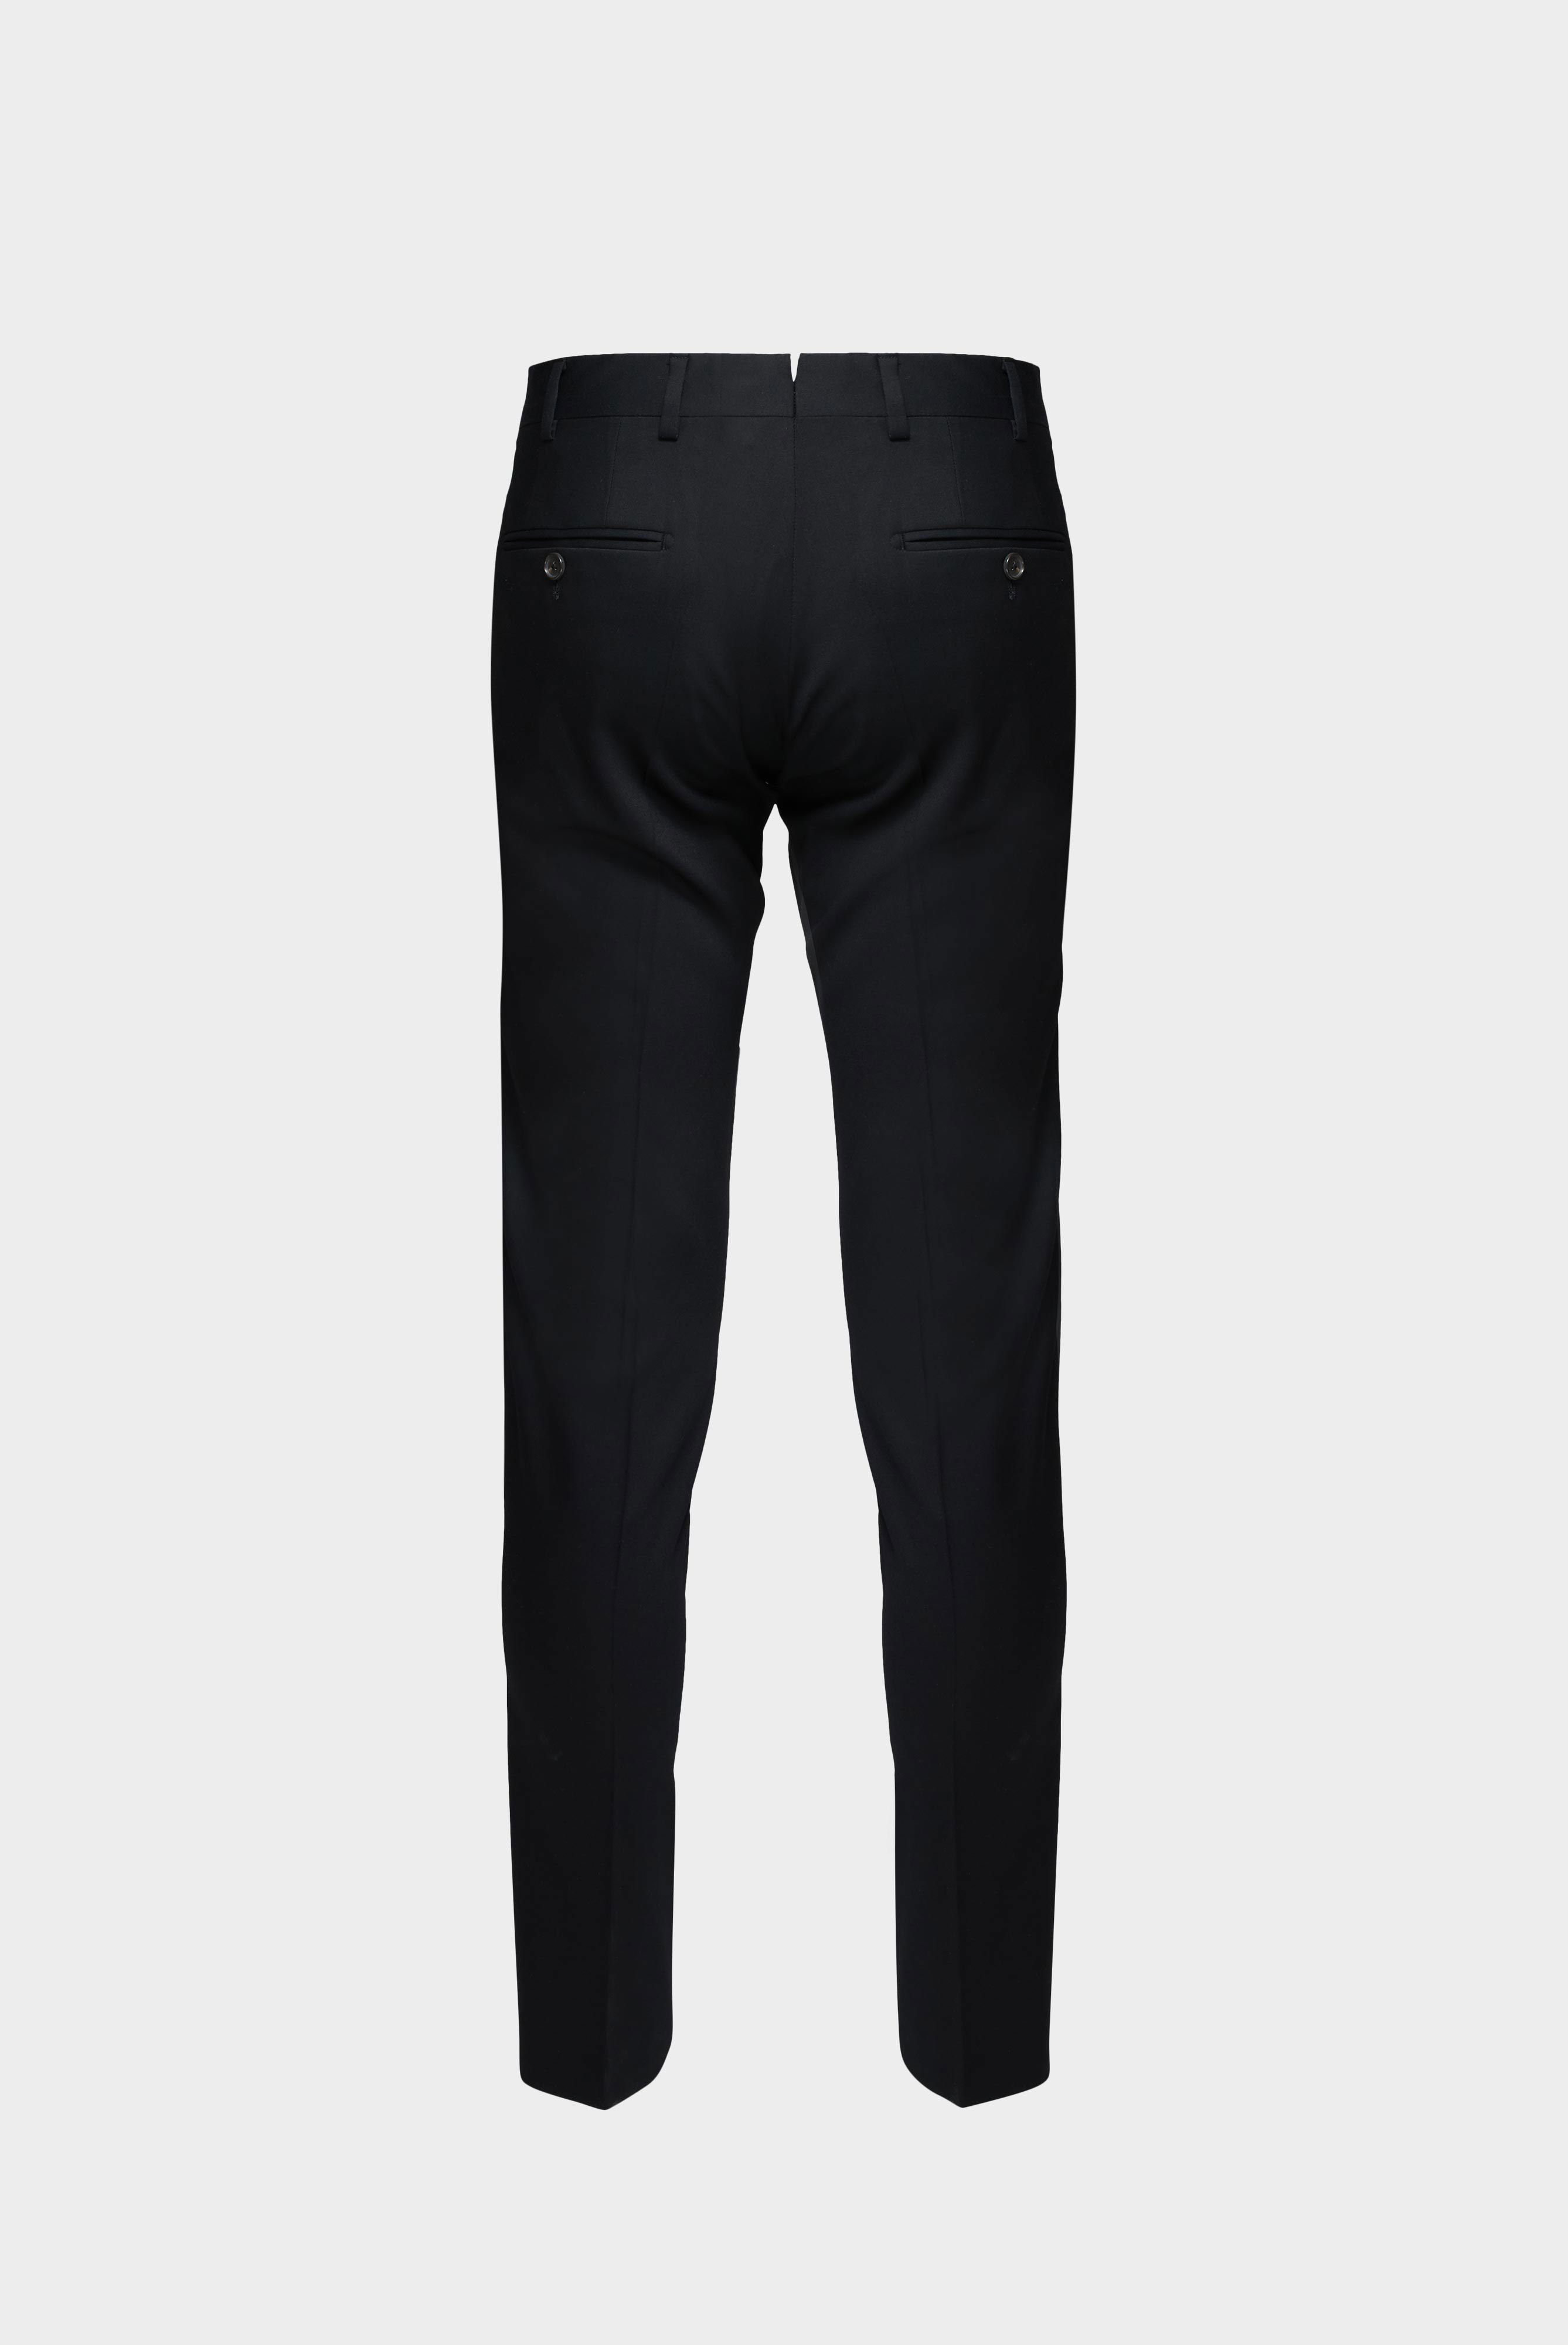 Jeans & Trousers+Wool Trousers Slim Fit+20.7880.16.H01010.099.98